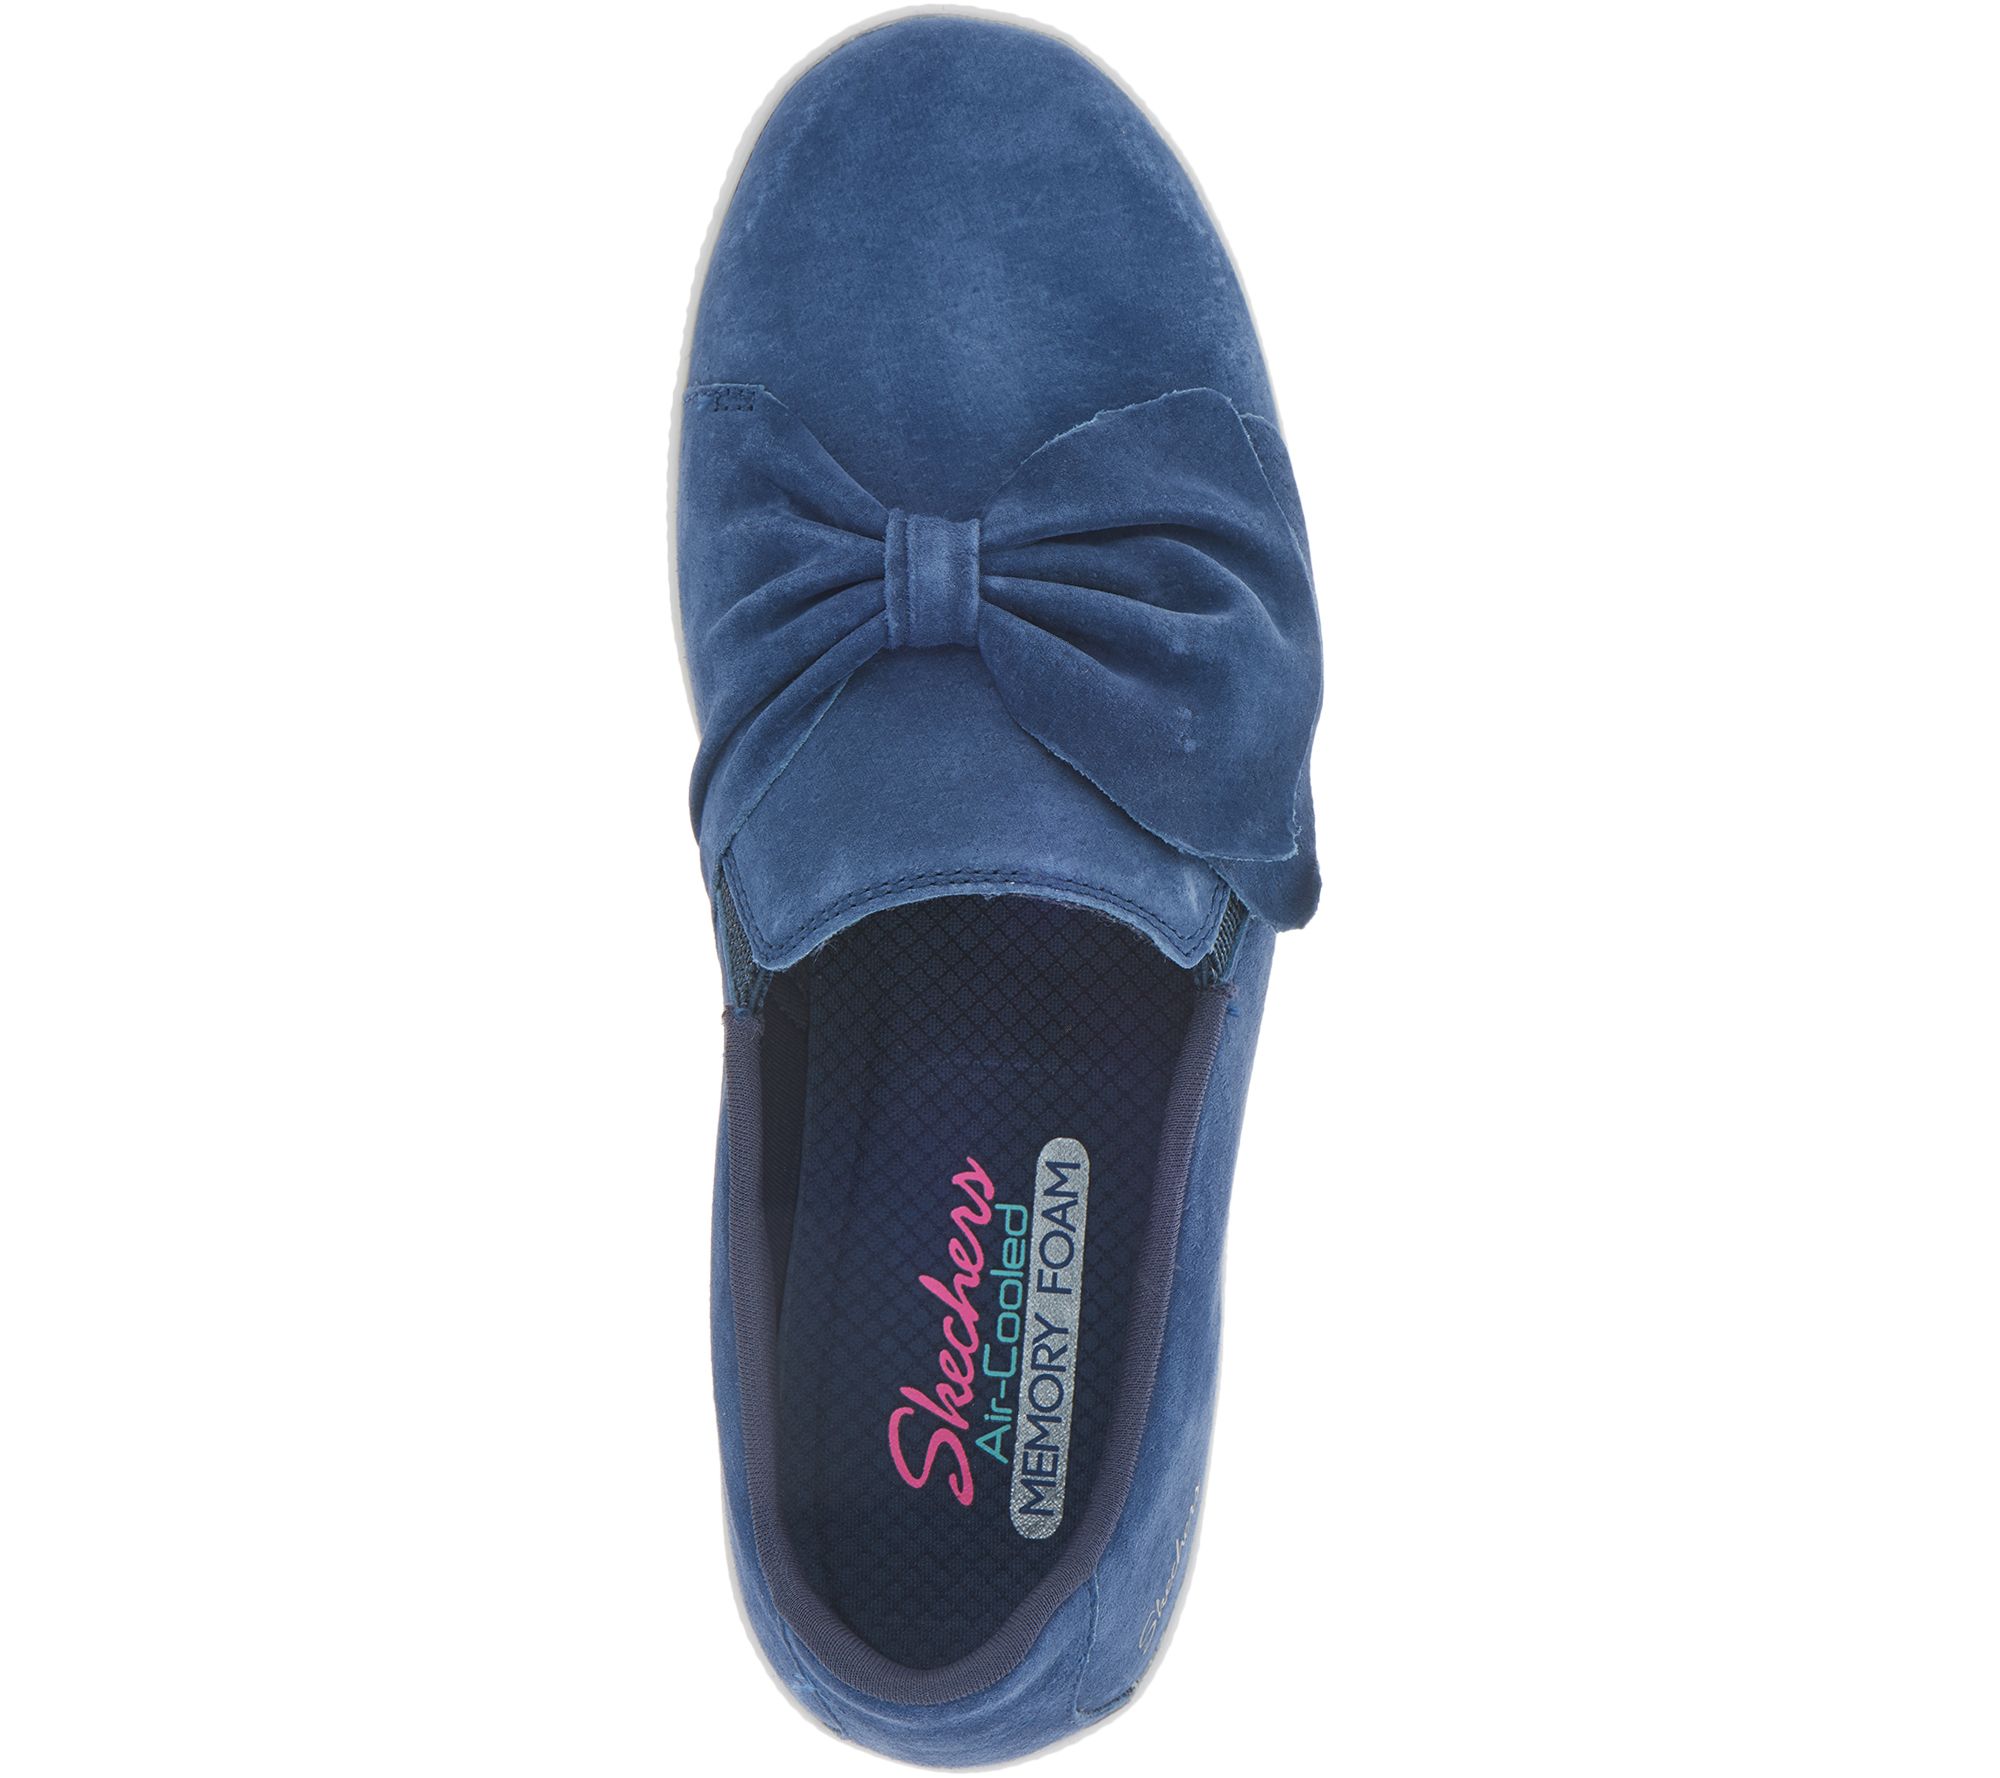 Skechers Suede Bow Slip On Shoes 